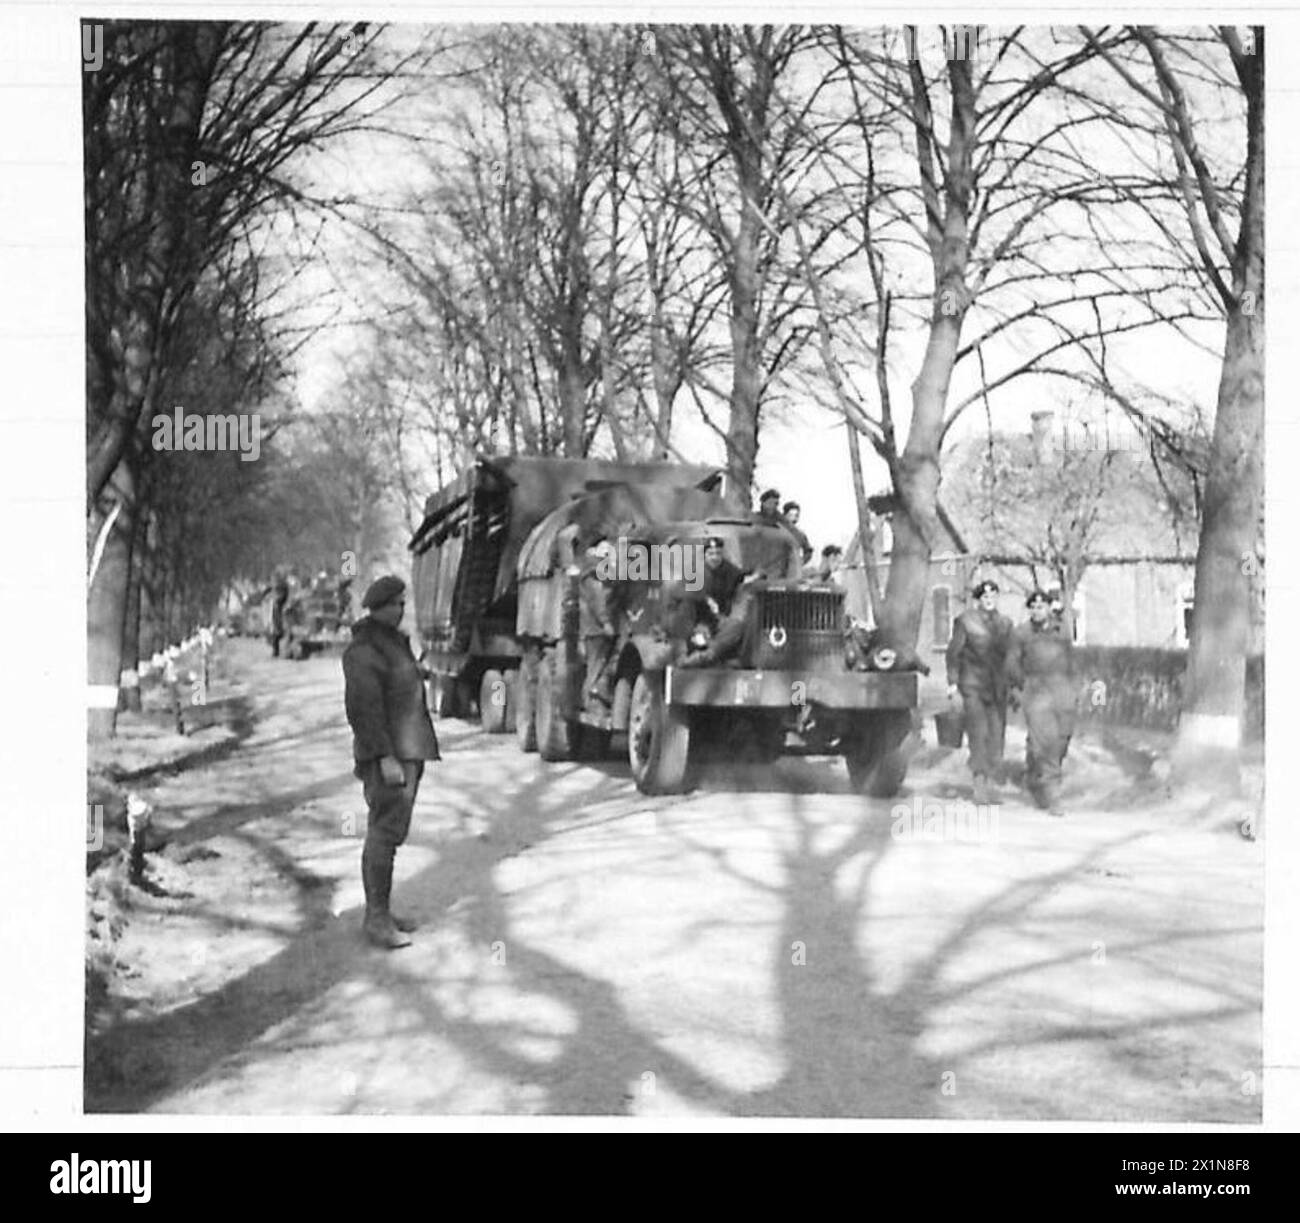 THE BRITISH ARMY IN NORTH-WEST EUROPE 1944-1946 - Heavy traffic on a road leading up to the Rhine, British Army, 21st Army Group Stock Photo